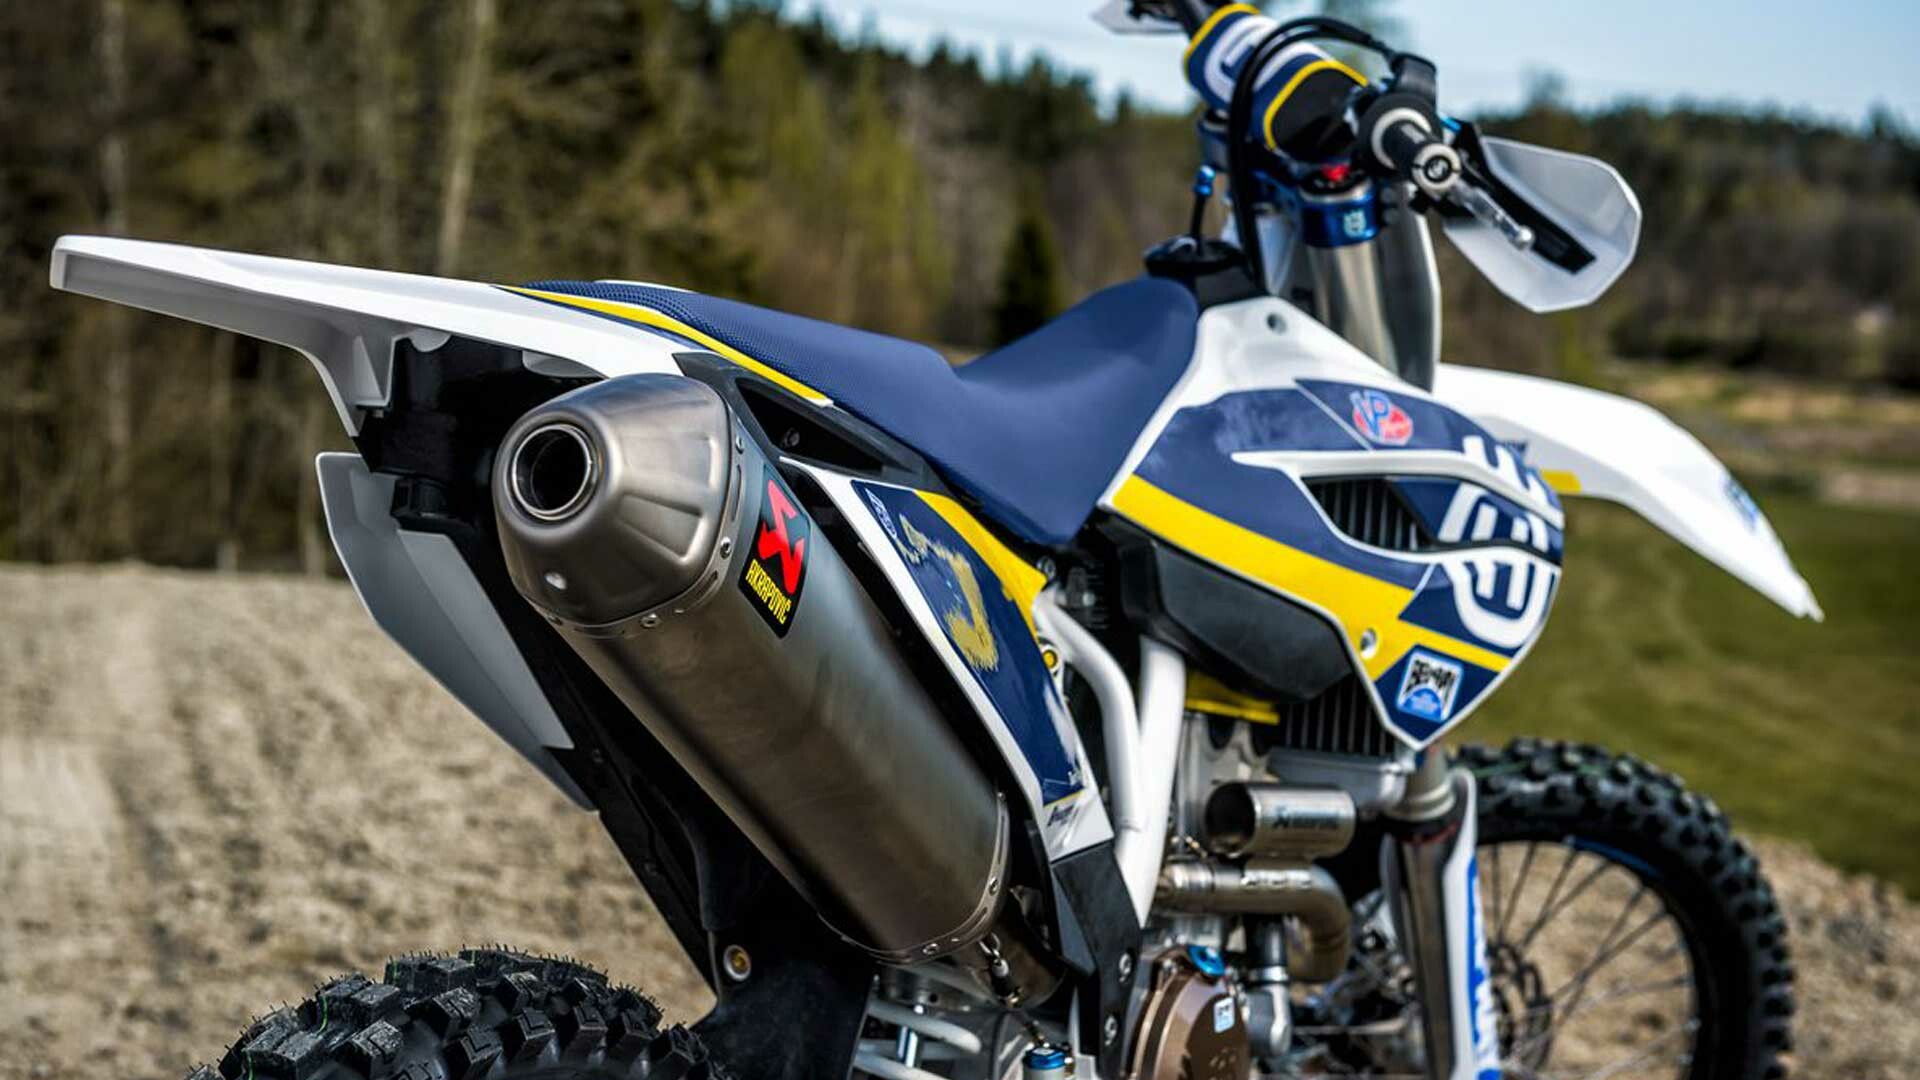 Husqvarna: One of the most revered European motorcycle brands, Supermoto. 1920x1080 Full HD Wallpaper.